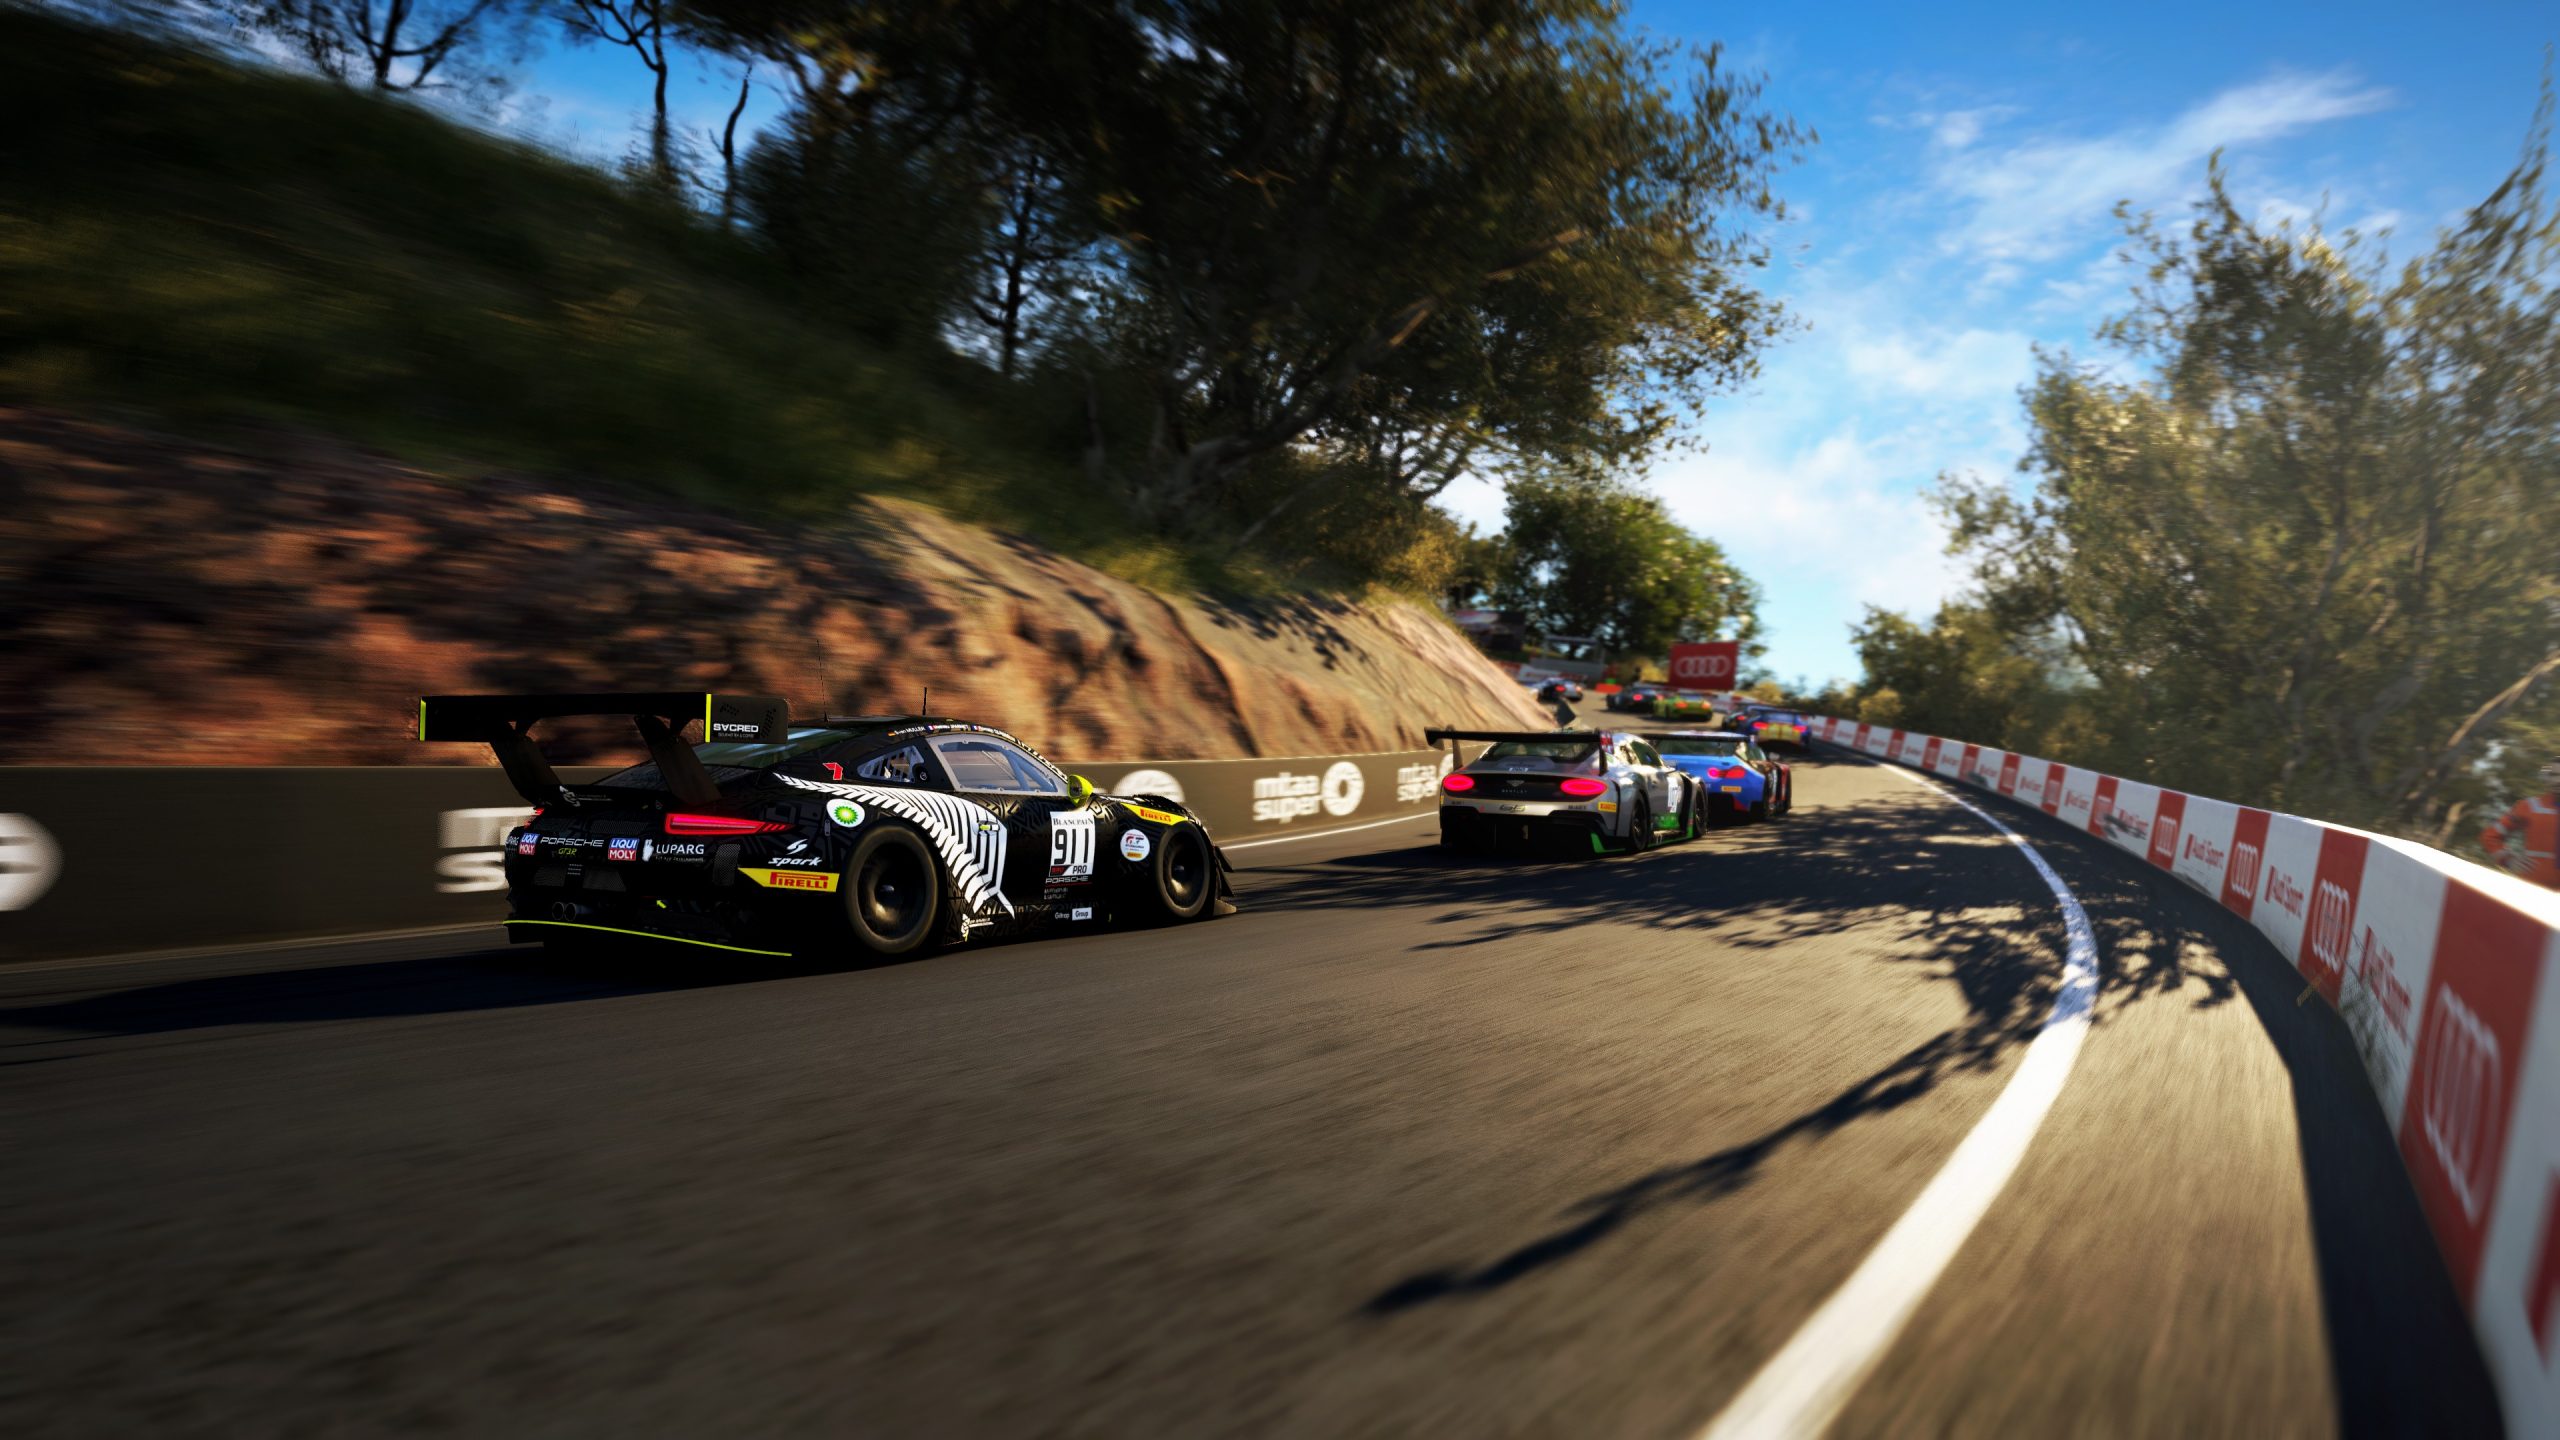 Assetto Corsa Competizione, Game Source Entertainment, PS4, PlayStation 4, racing game, Asia, Southeast Asia, release date, gameplay, features, price, trailer, pre-order